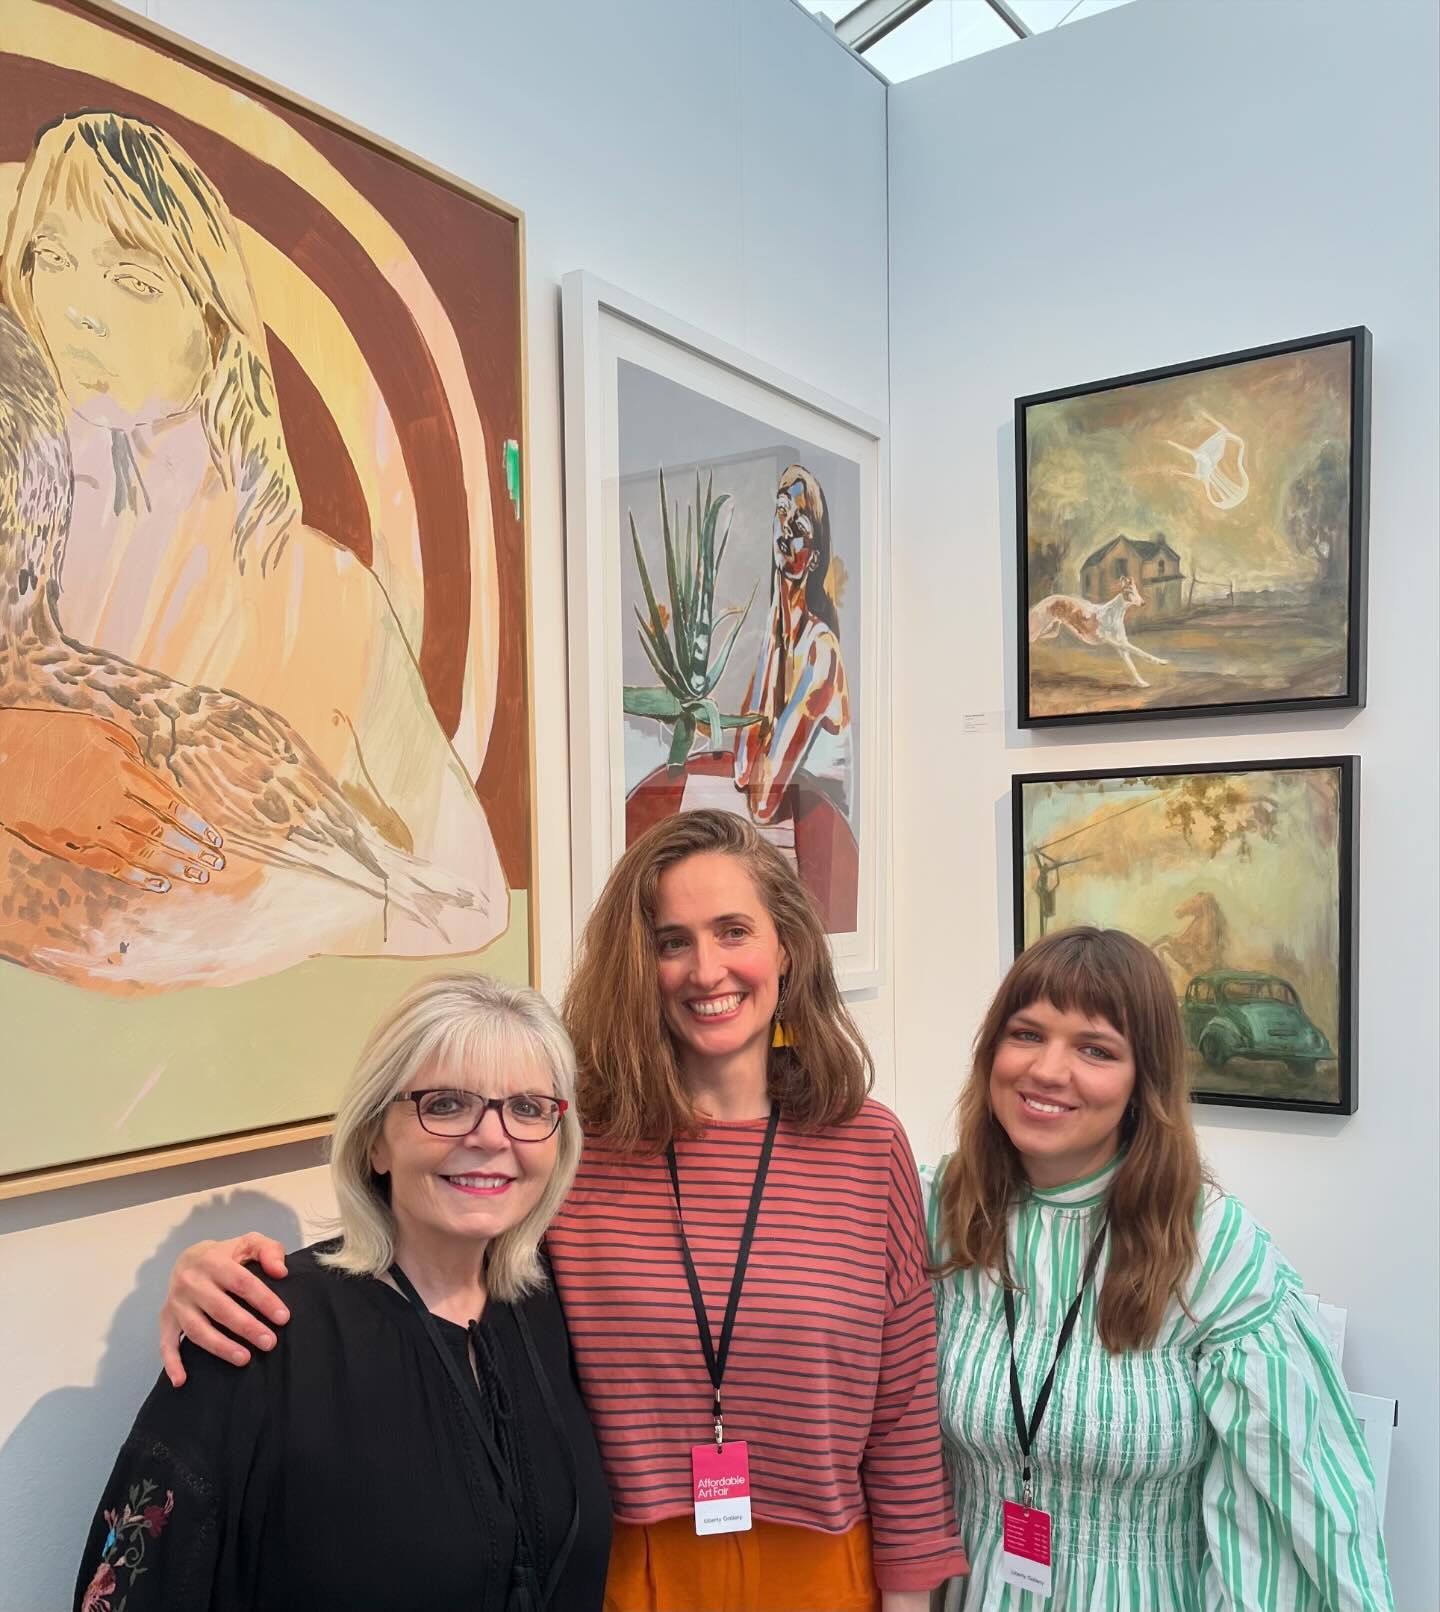 It&rsquo;s always such a treat to #meettheartist and we had some very happy clients able to chat with two of our brilliant artists @affordableartfairuk - @marcelinaamelia and @gracewilmshurst Shown here are @out_in_london and @andfotography2 (great a